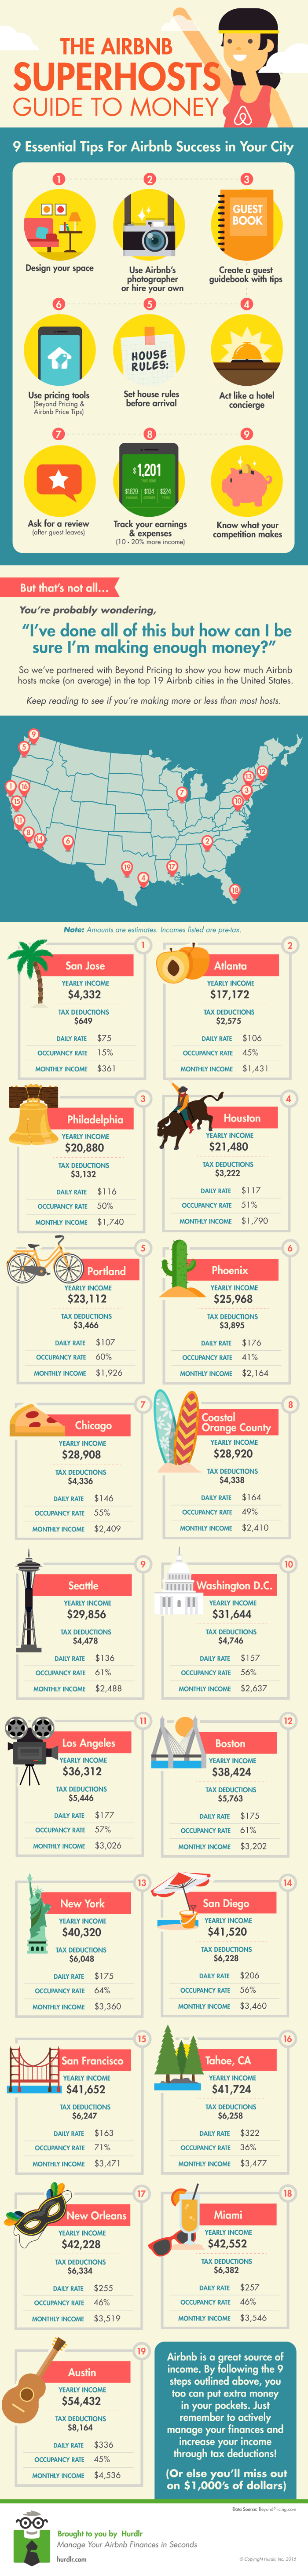 The Airbnb Superhost Guide To Money